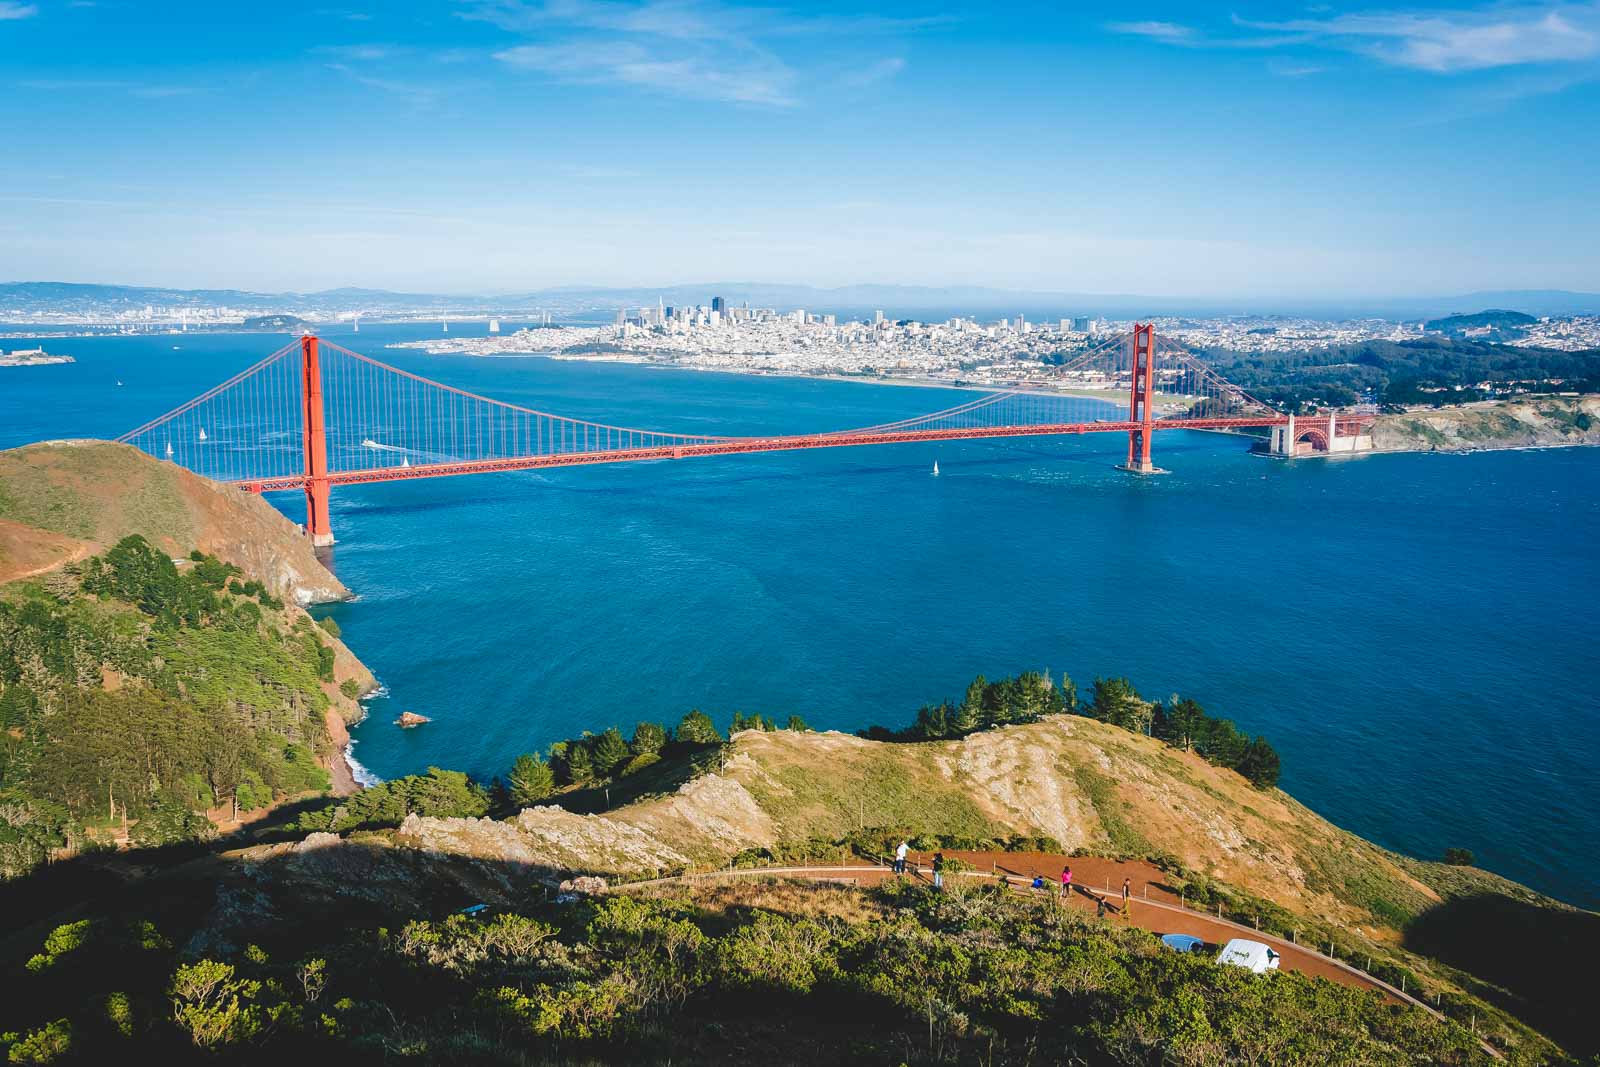 A viewpoint of the full Golden Gate Bridge from Battery 129 on Hawk Hill.